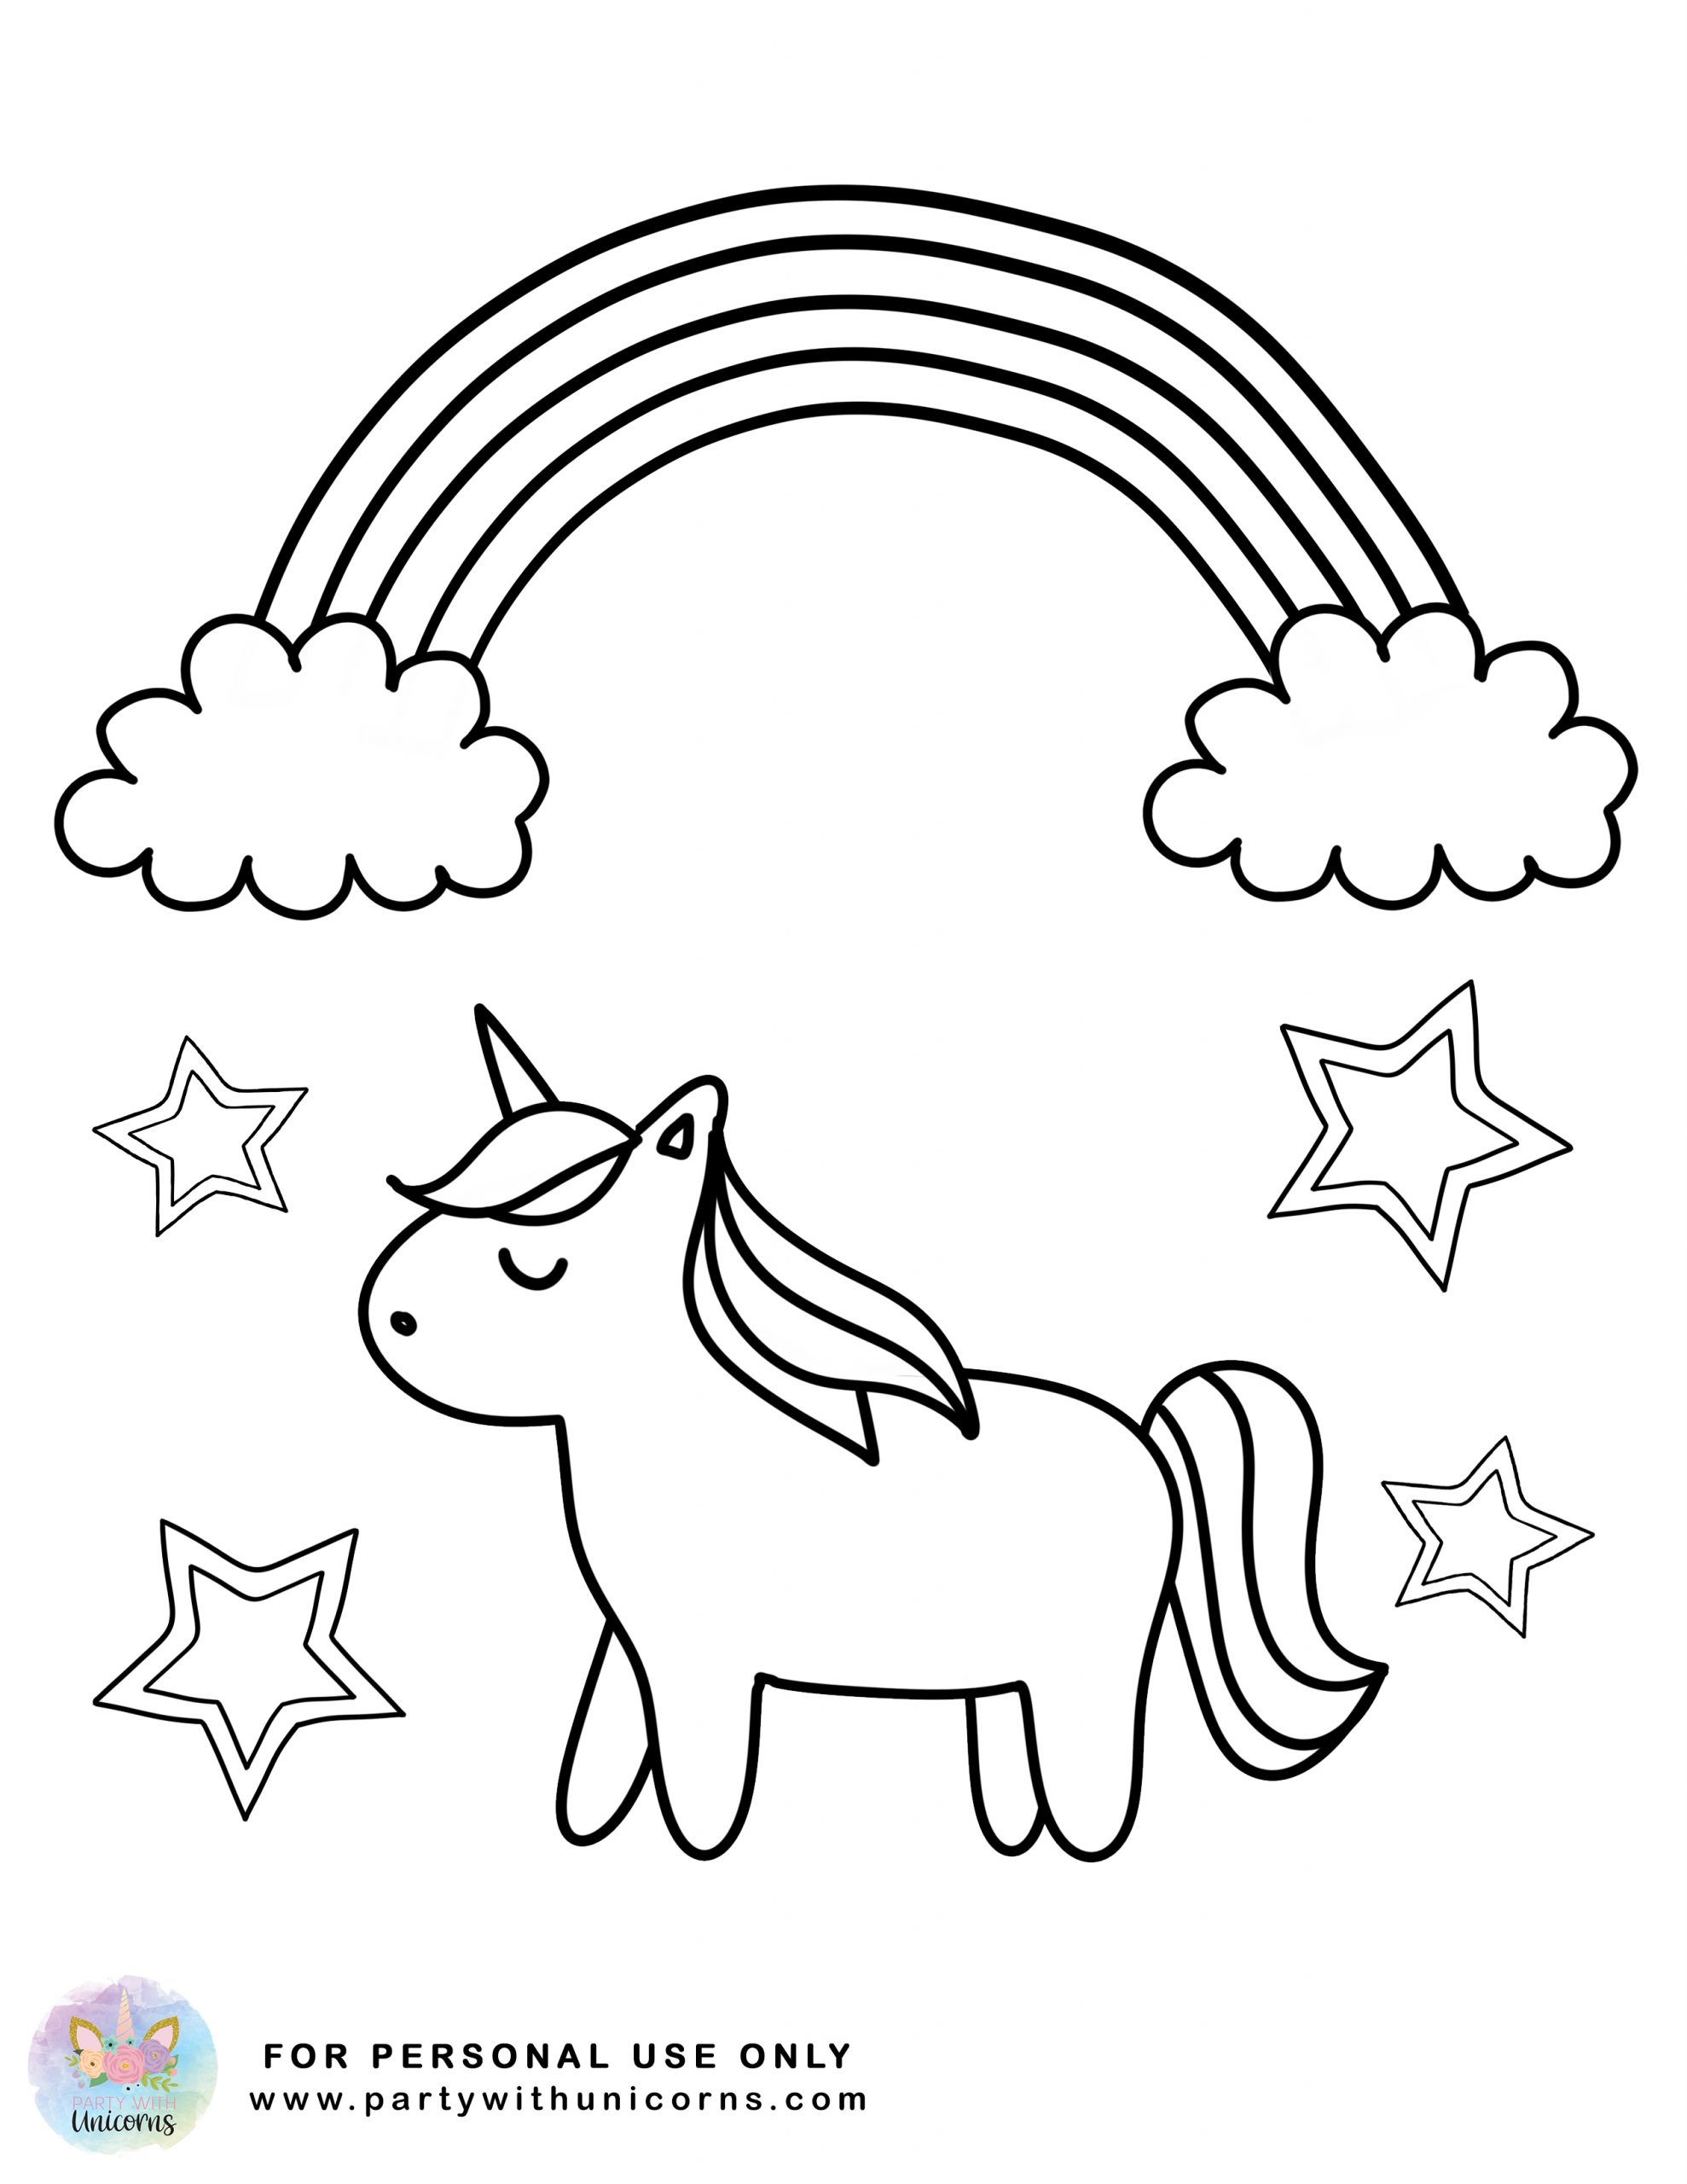 Unicorn Coloring Pages -20 Printable Unicorn Coloring Book